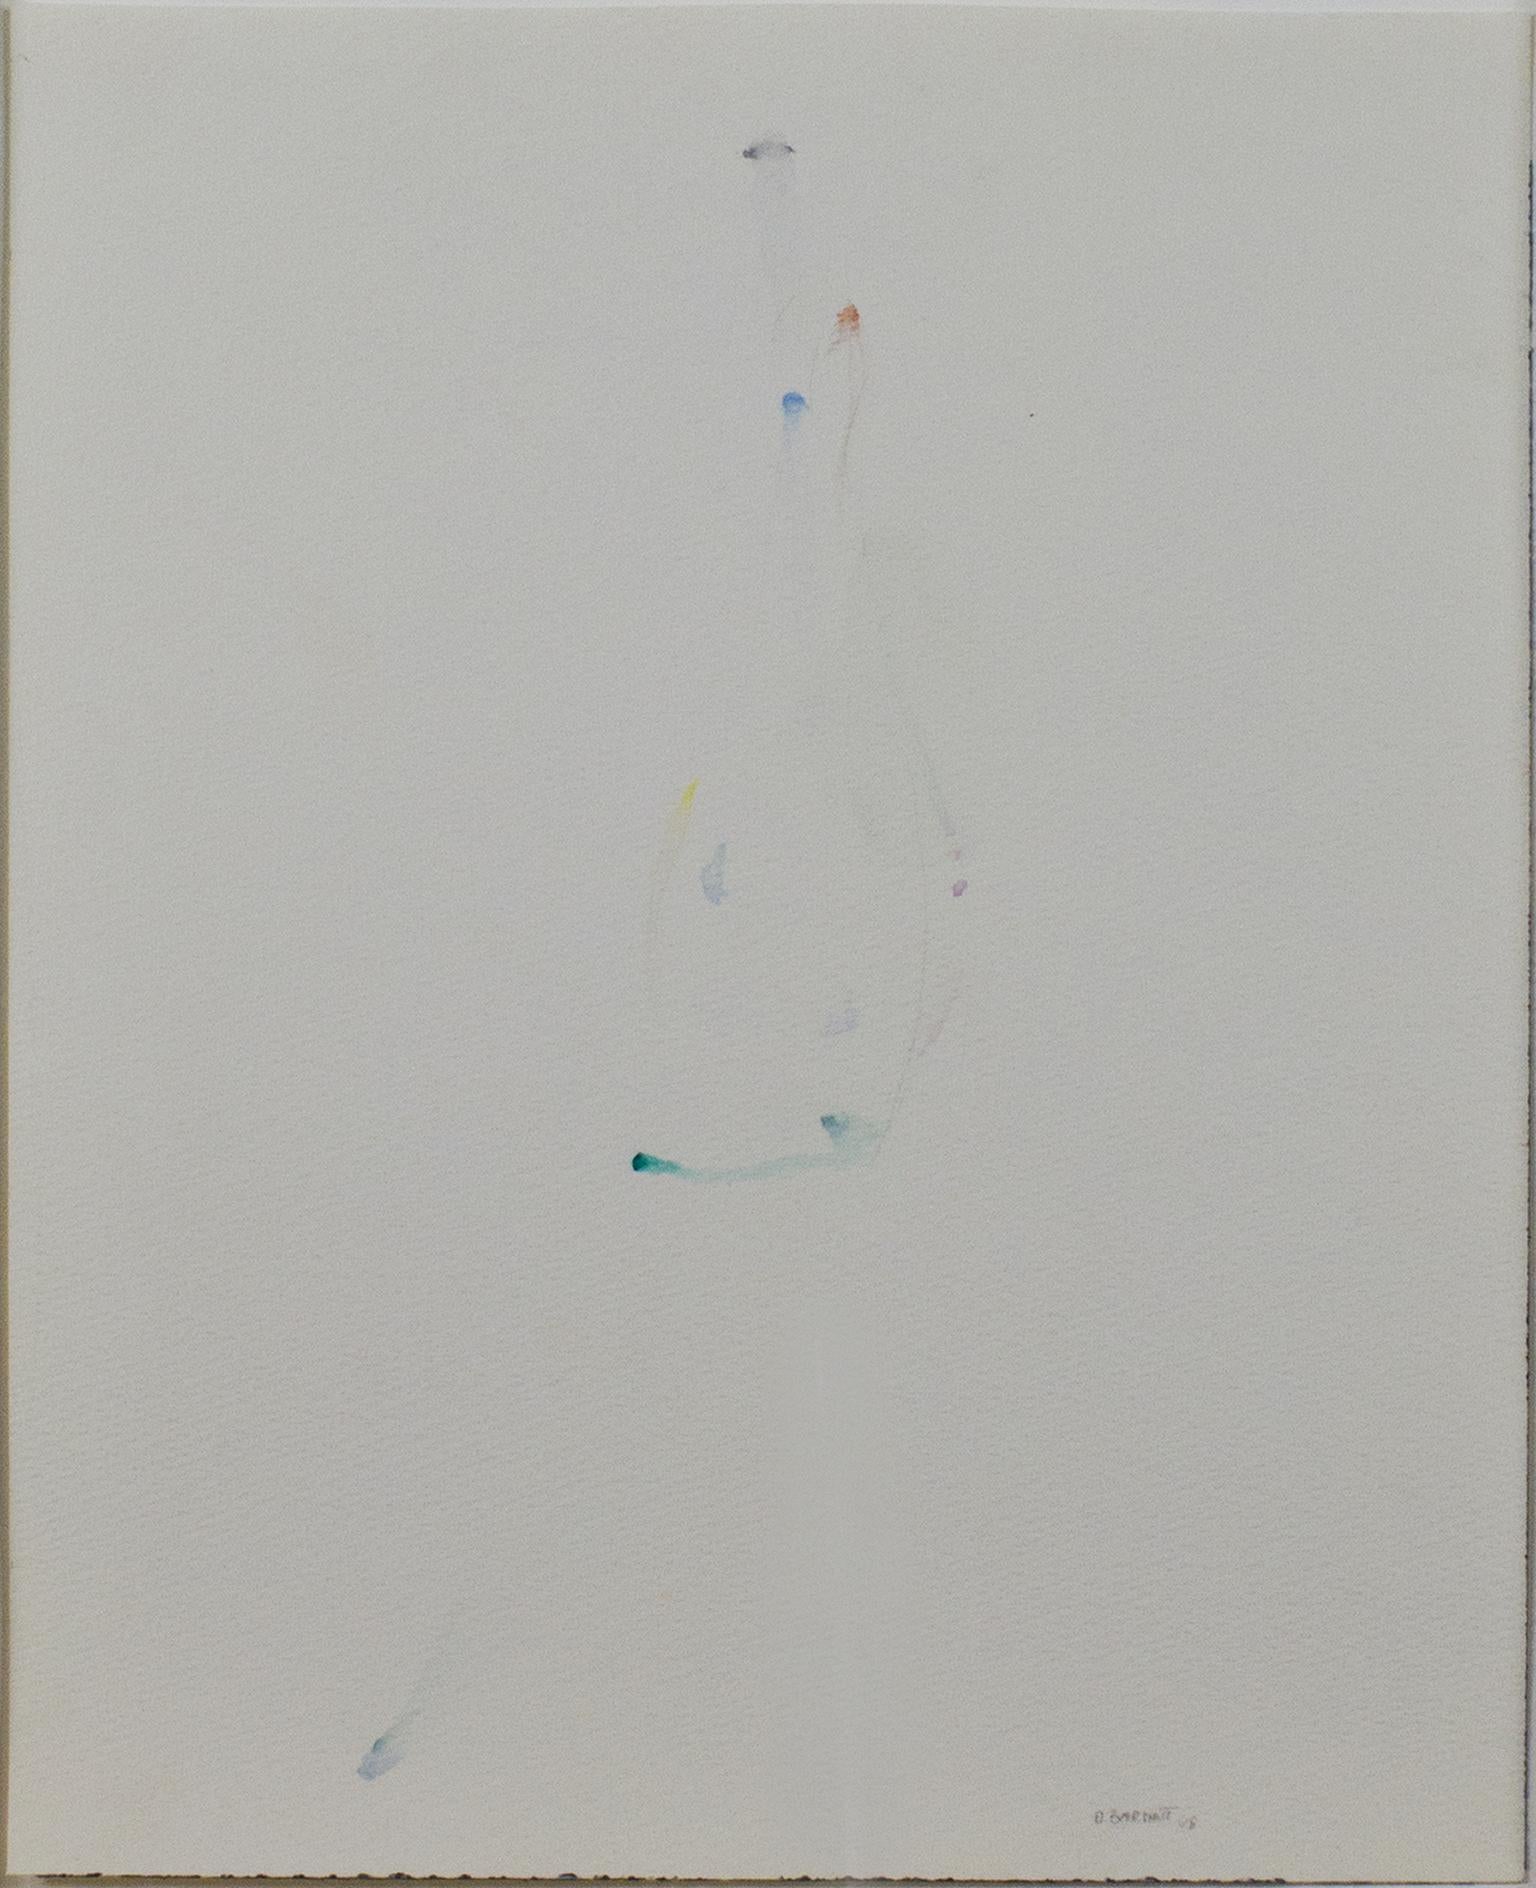 "Grand Display" is an original watercolor painting by David Barnett, signed in the lower right corner. The piece is composed of minimal brushstrokes in green, yellow, blue, and red, forming a loose triangle at the center of the image. 

Art size: 11